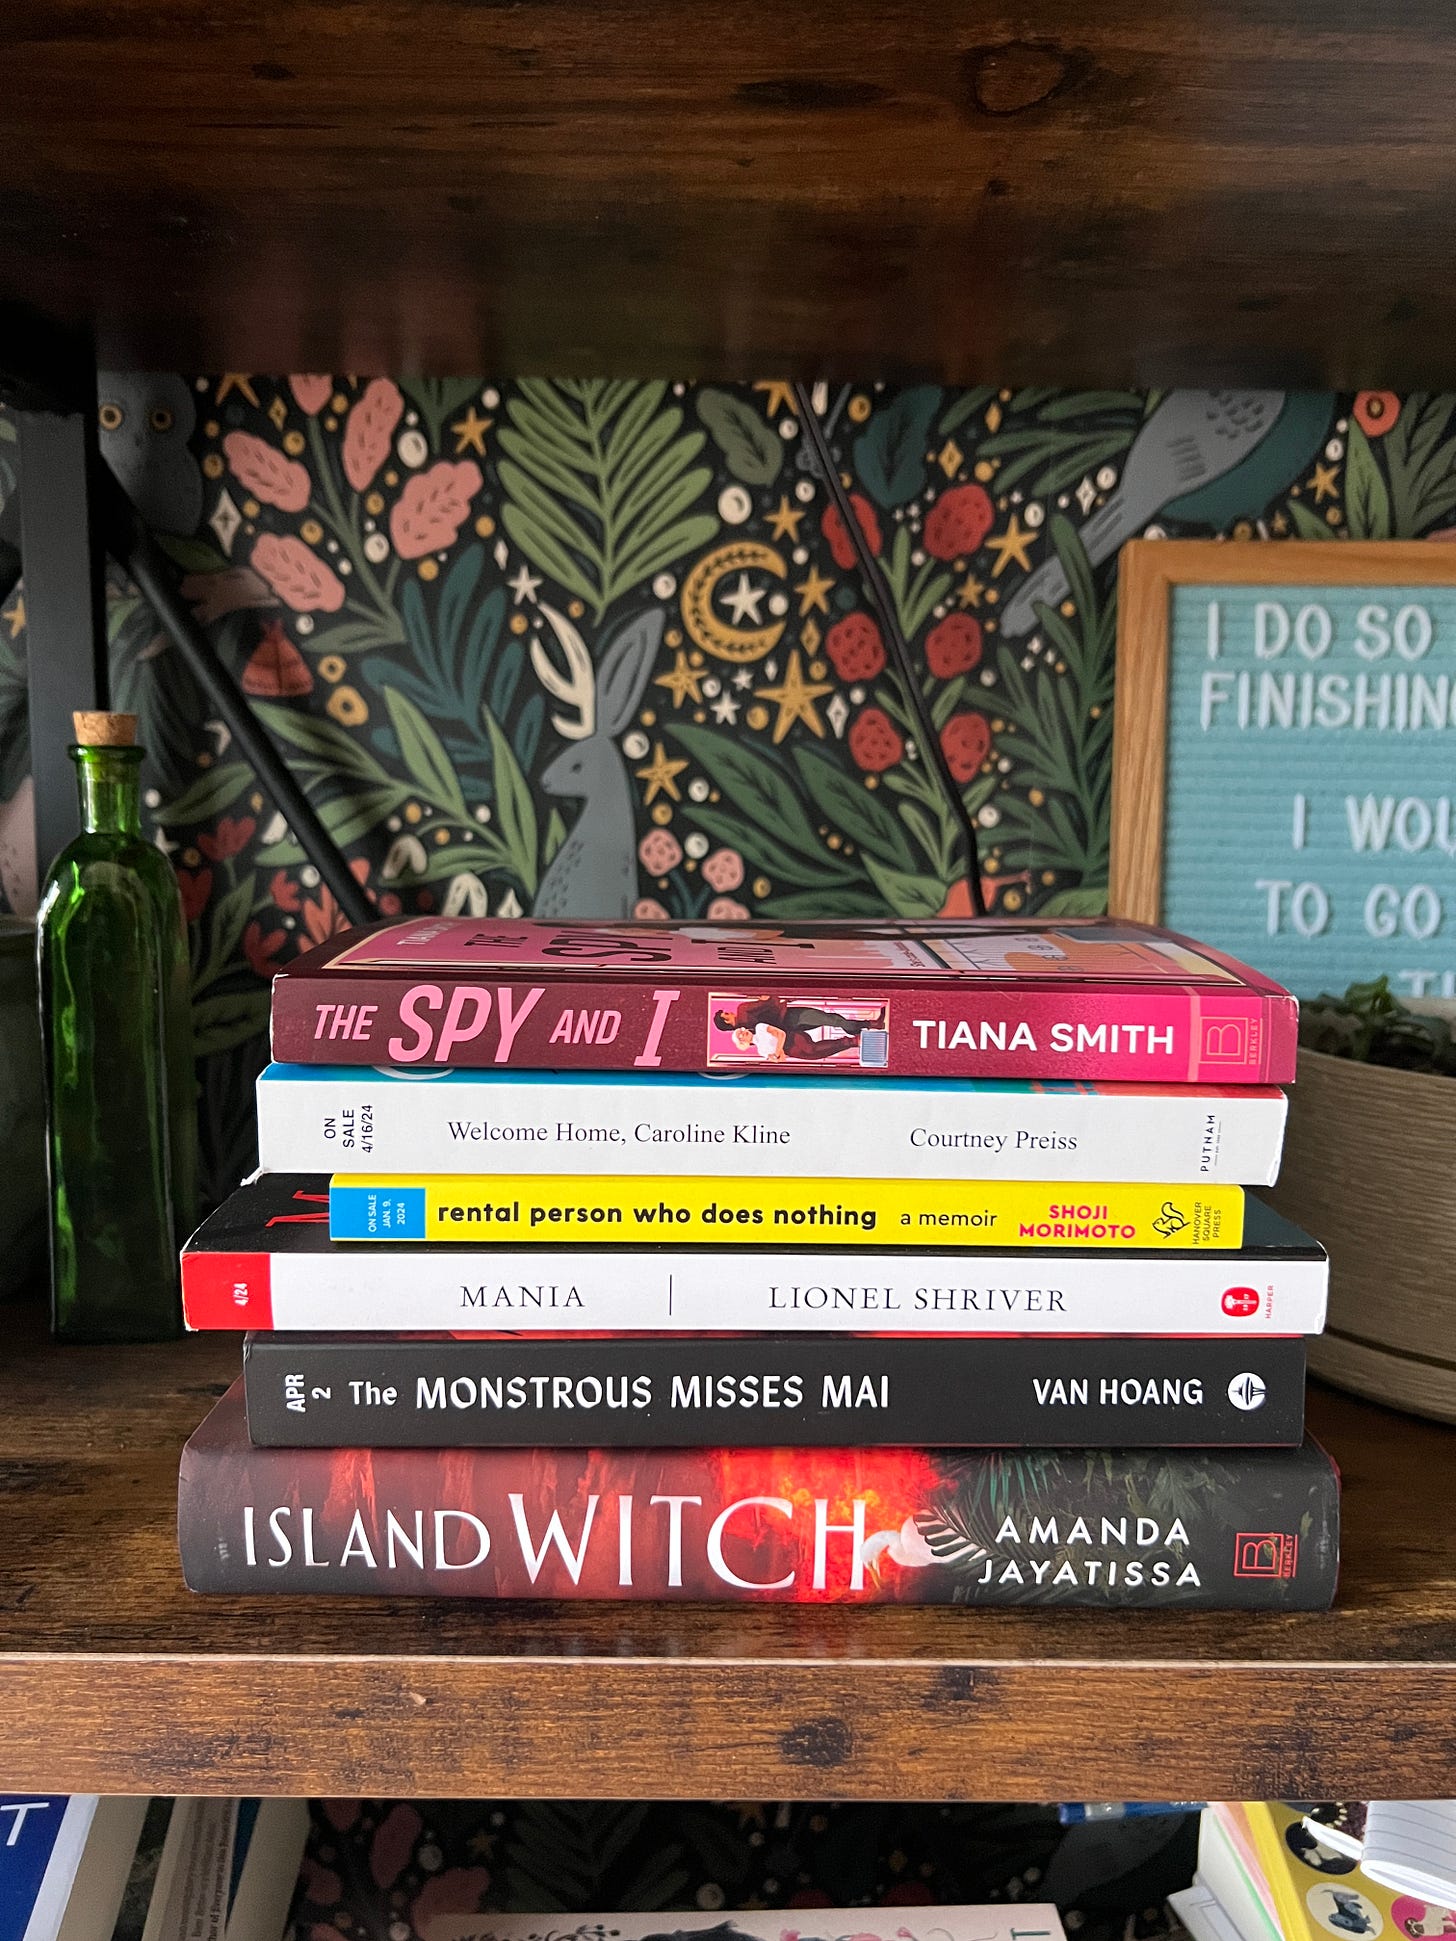 Book stack of books and ARCs that includes: The Spy and I, Welcome Home Caroline Kline, Rental Person Who Does Nothing, Mania, the Monstrous Misses Mai, and Island Witch